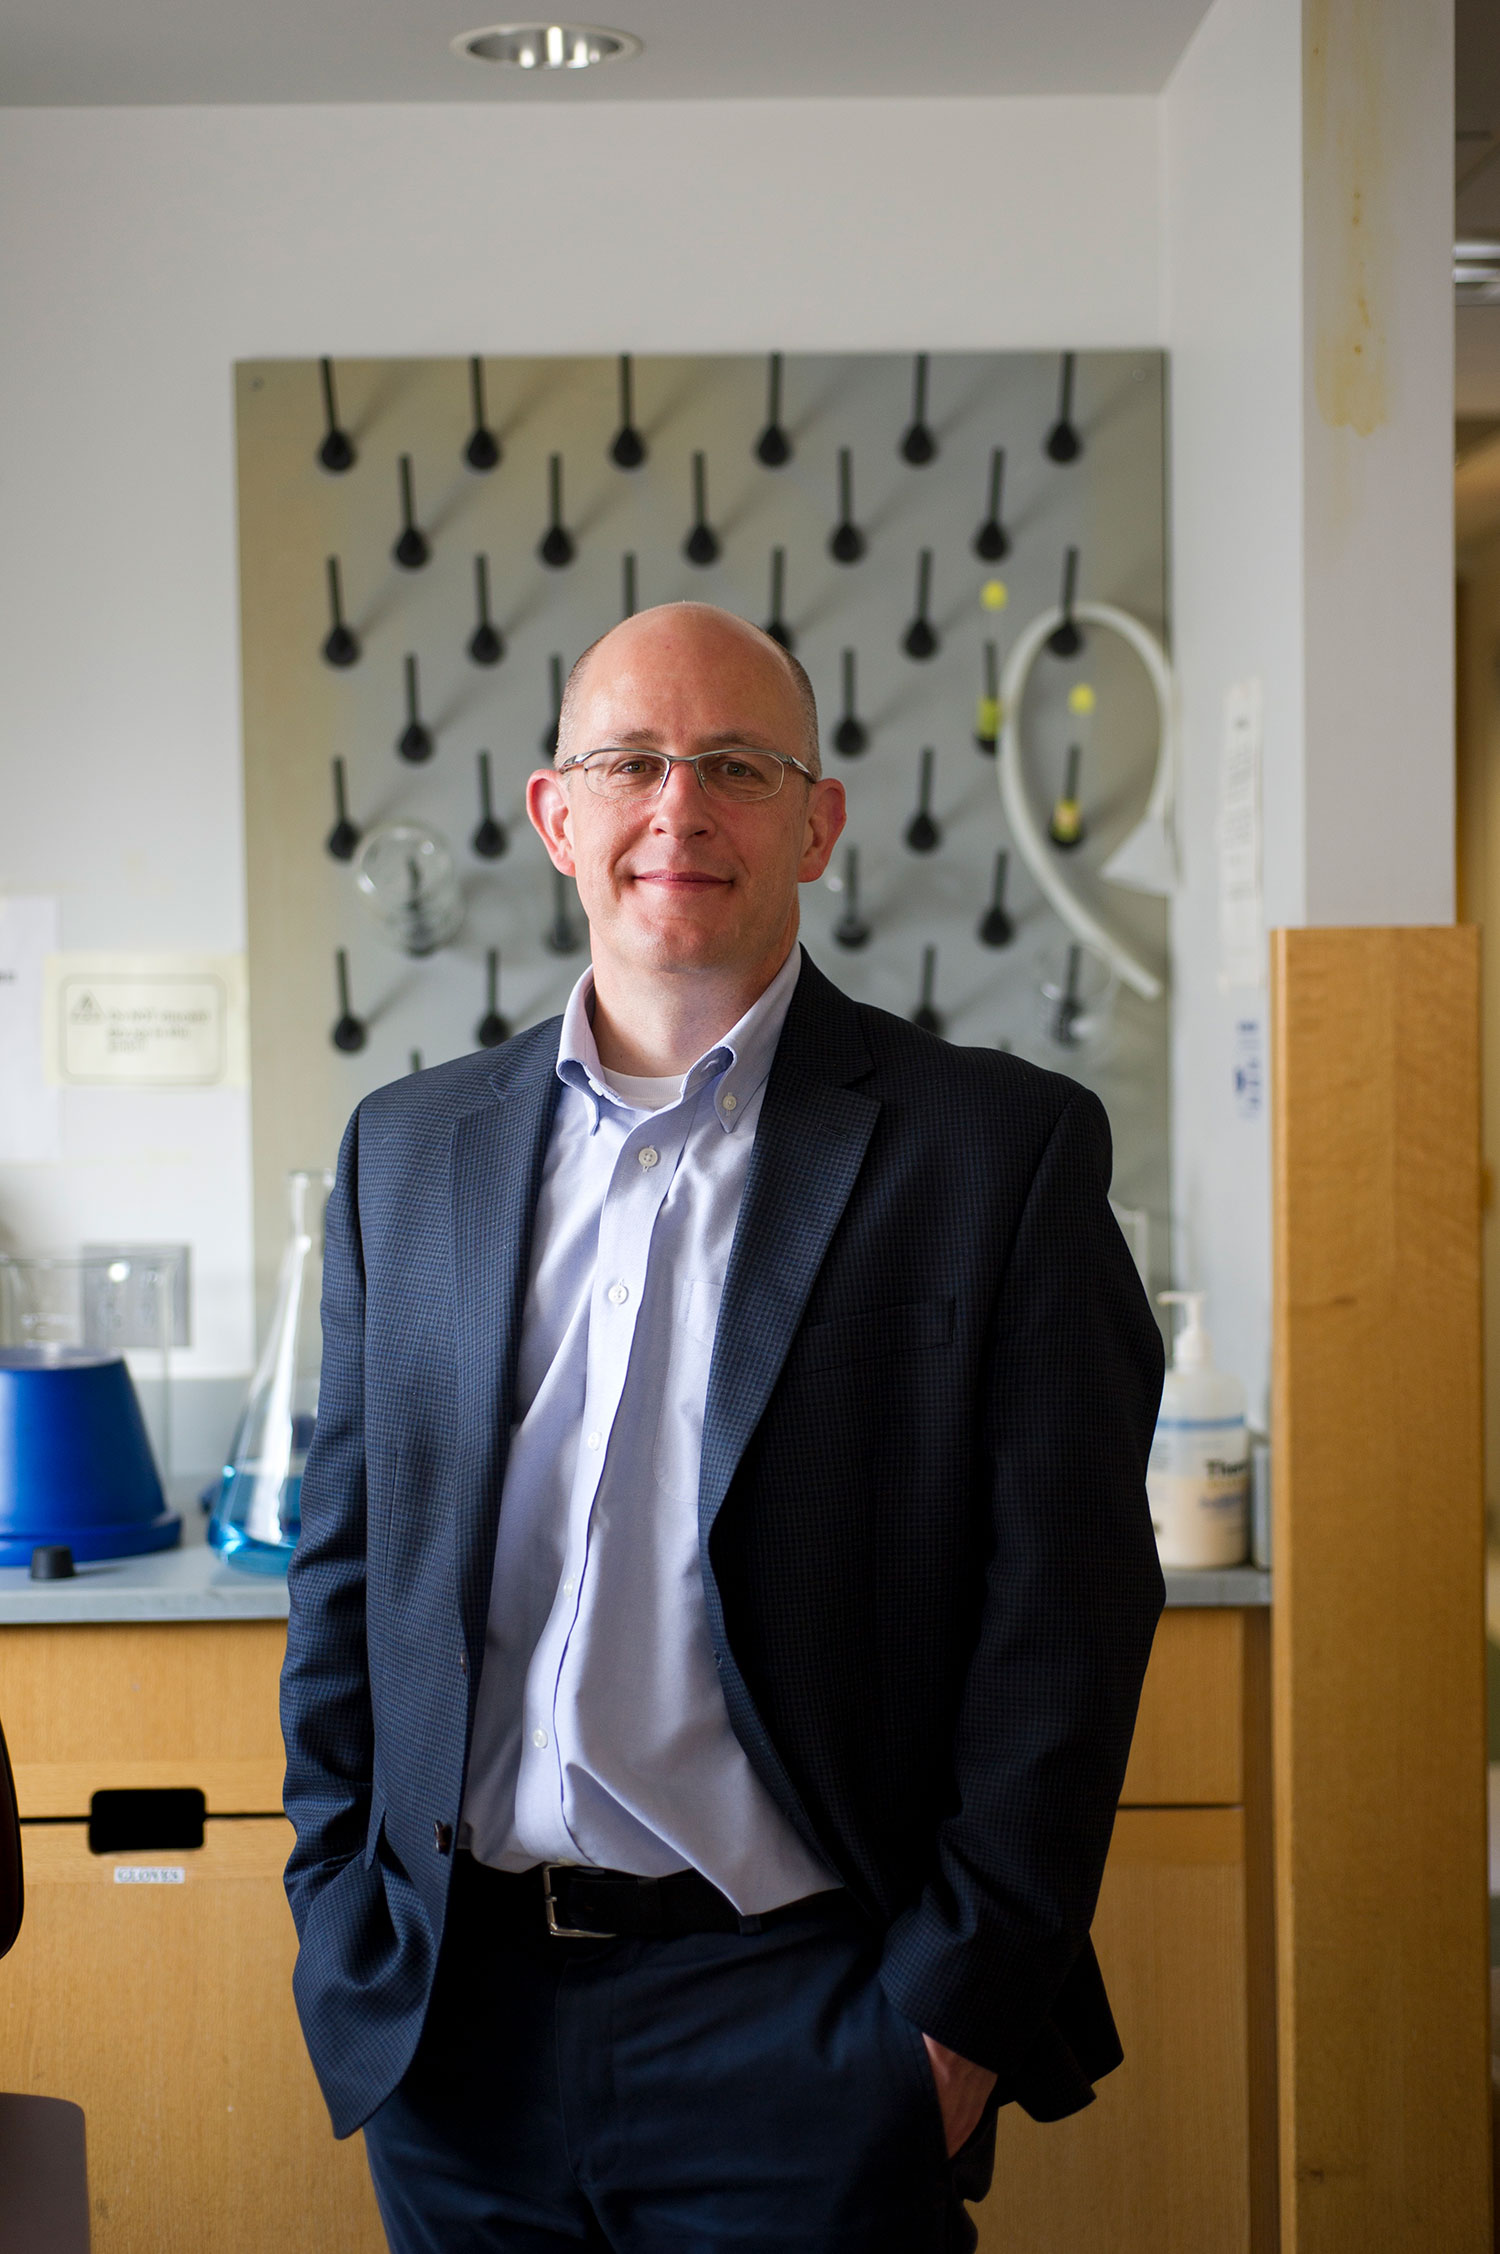 Portrait of Joseph Mizgerd, a pulmonary researcher and principal investigator, in his lab in the Medical Campus Housman Building. He wears a blue blazer and smiles.